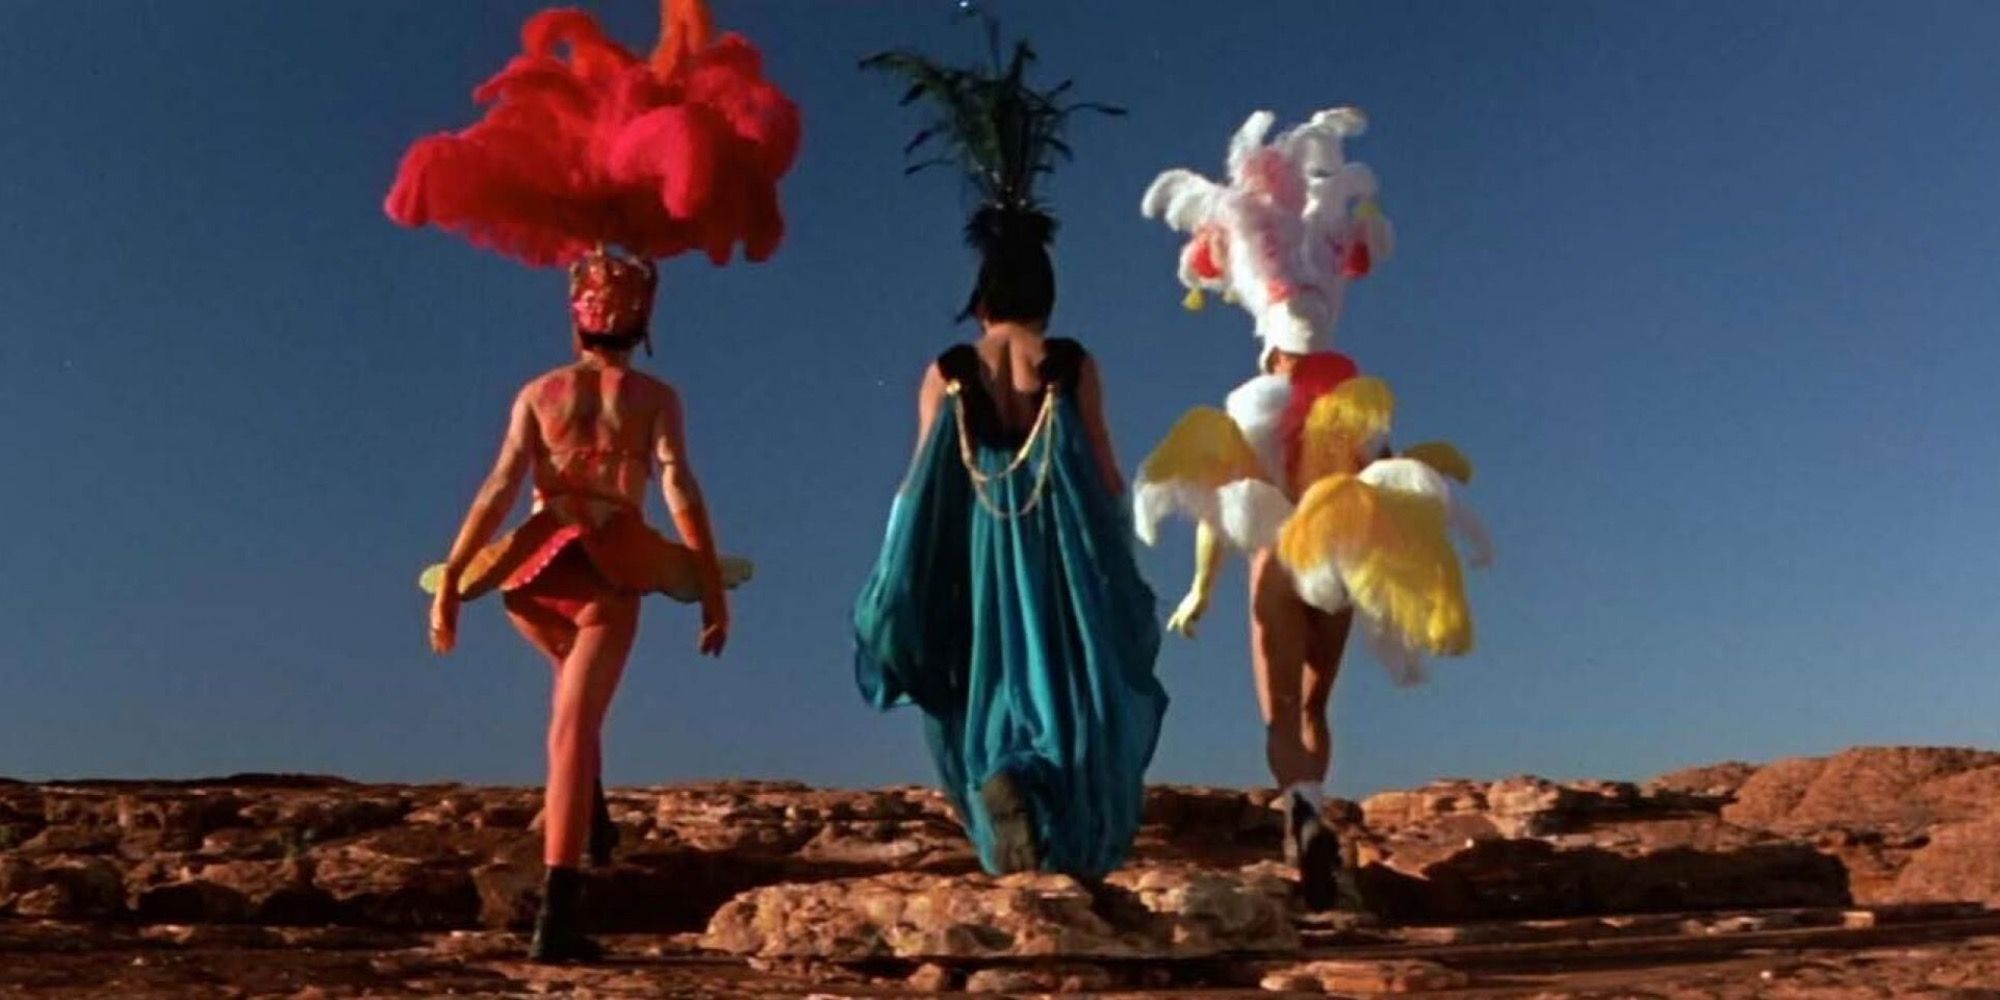 Two drag queens and a transgender woman walking in the desert in costume